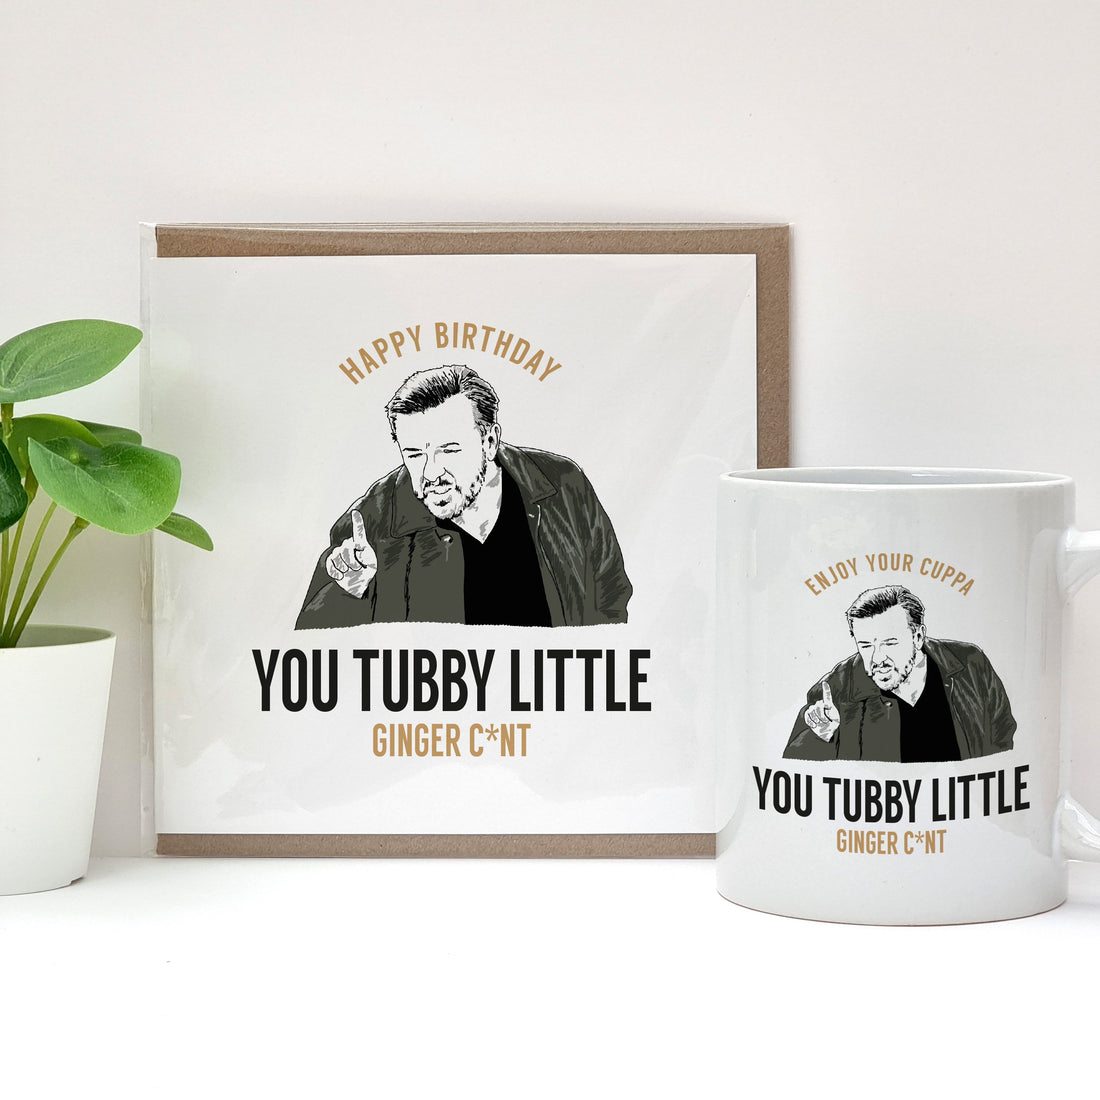 Funny Afterlife themed birthday card and mug gift set. Ricky gervais quote. Tubby little ginger c*nt